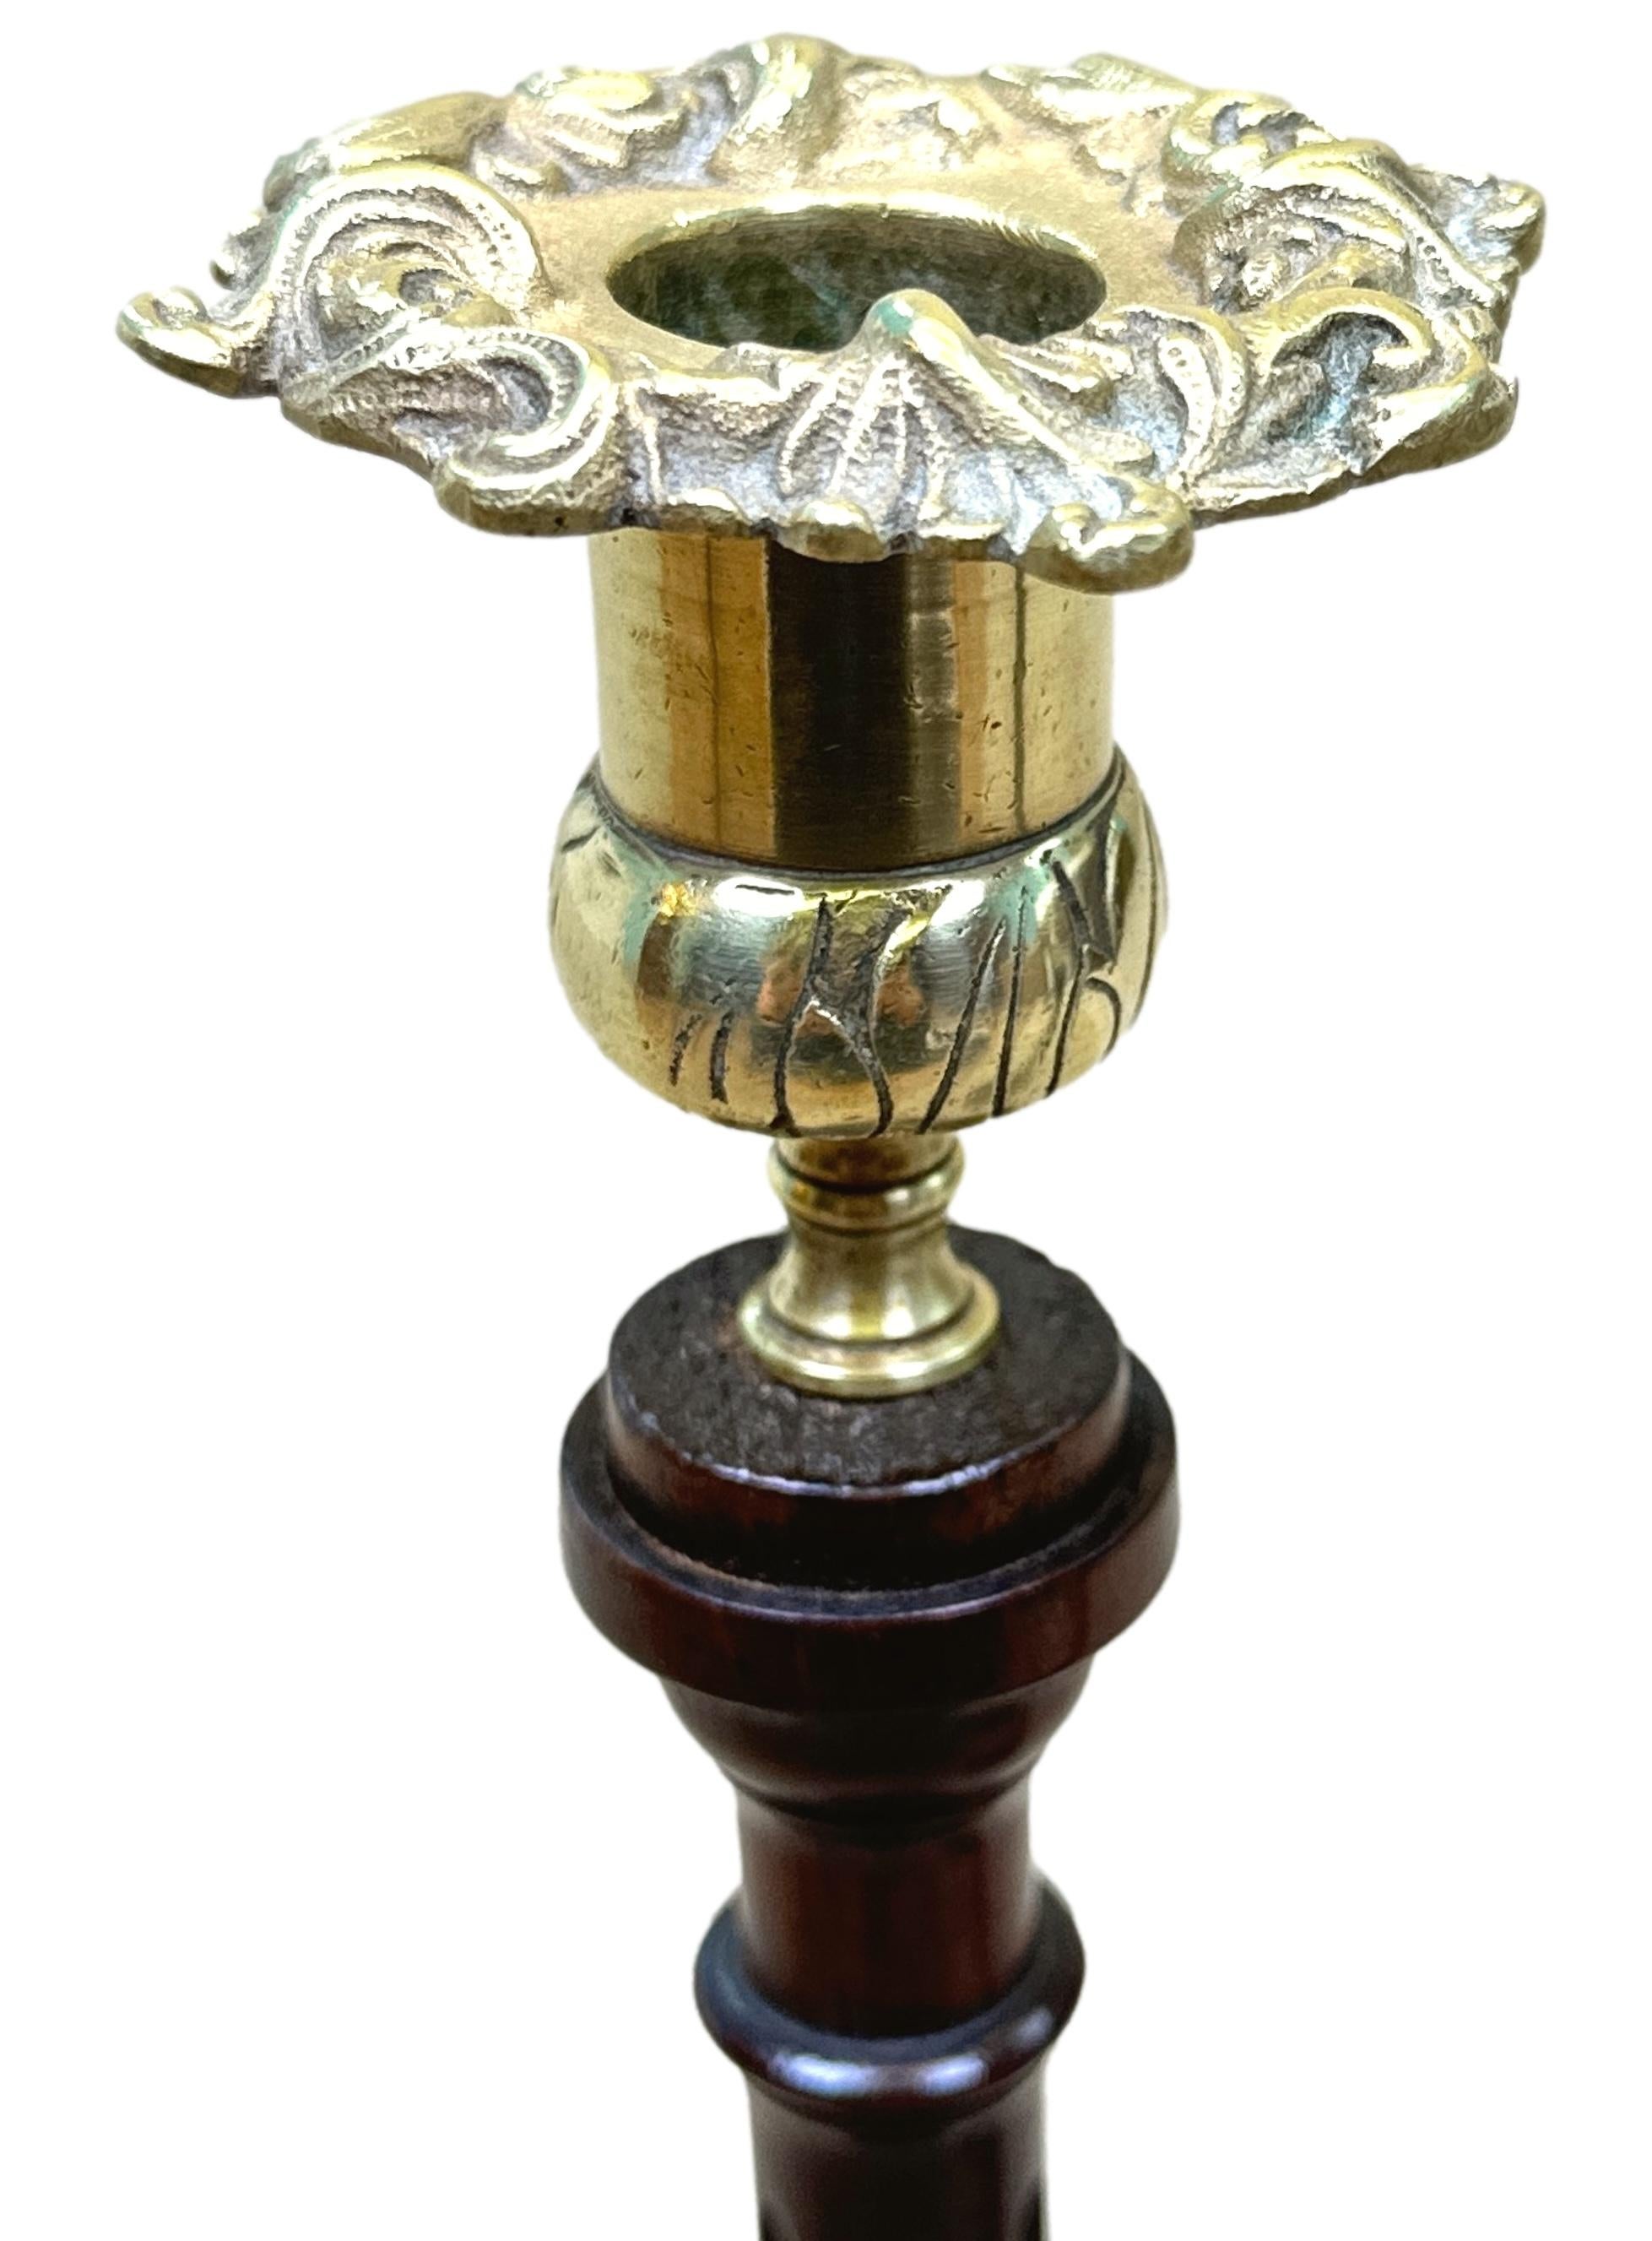 A Good Quality And Attractive Late 19th Century Pair Of Mahogany And Brass Candlesticks, In The 18th Century Georgian Style, Having Charming Foliate Cast Brass Nozzles Over Elegant Fluted, Turned Shafts, With Twisted Carving To Bottom Raised On